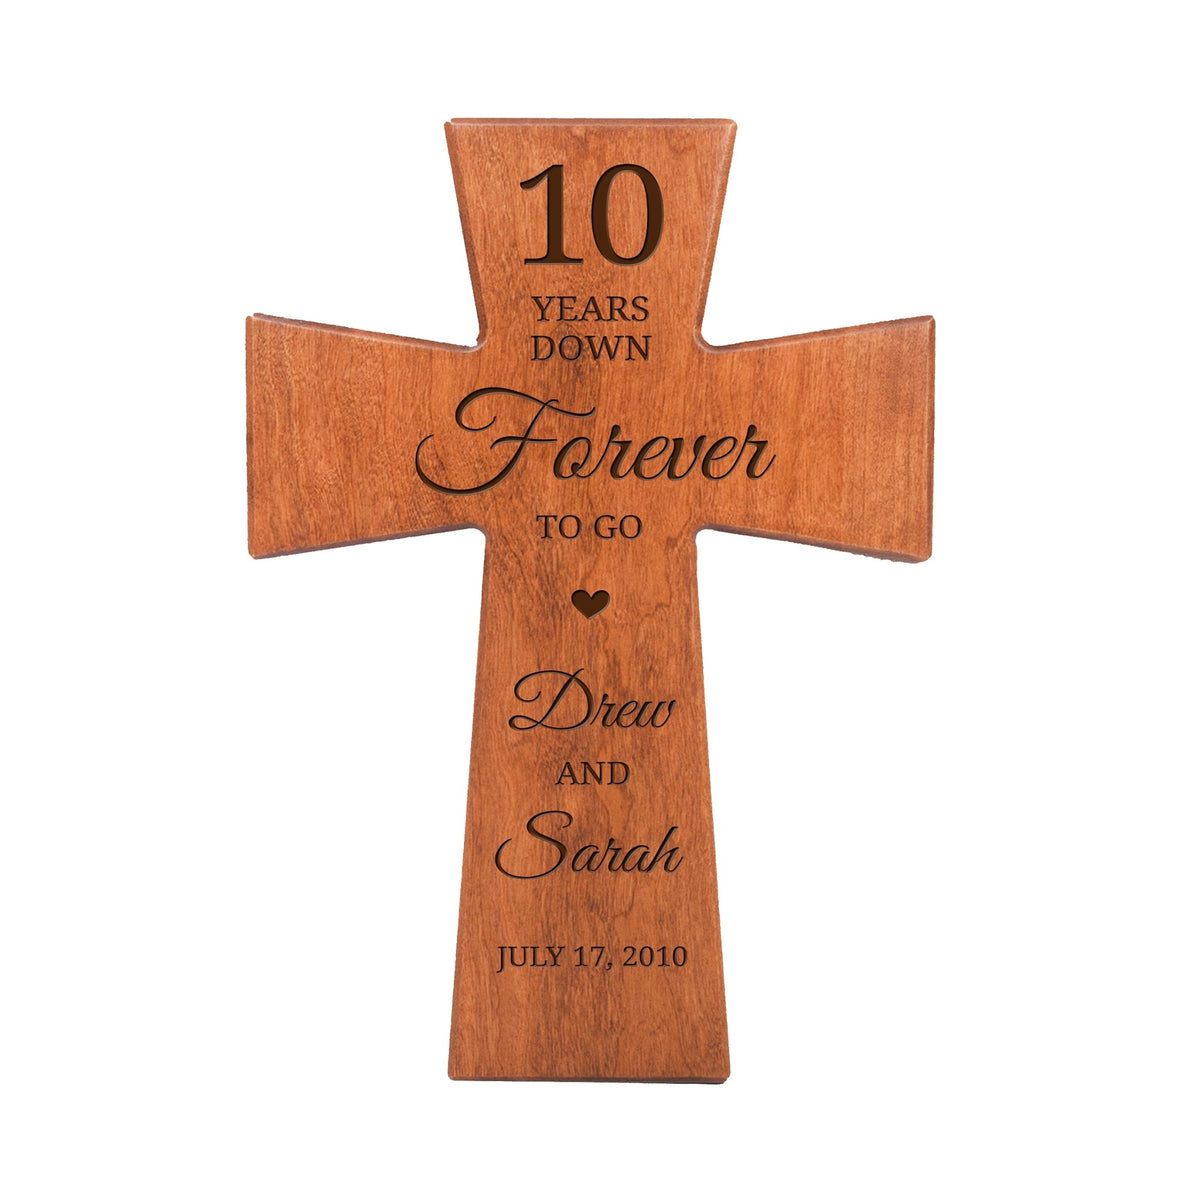 Lifesong Milestones Elegant Personalized Wall Cross - Perfect for 10th Wedding Anniversary